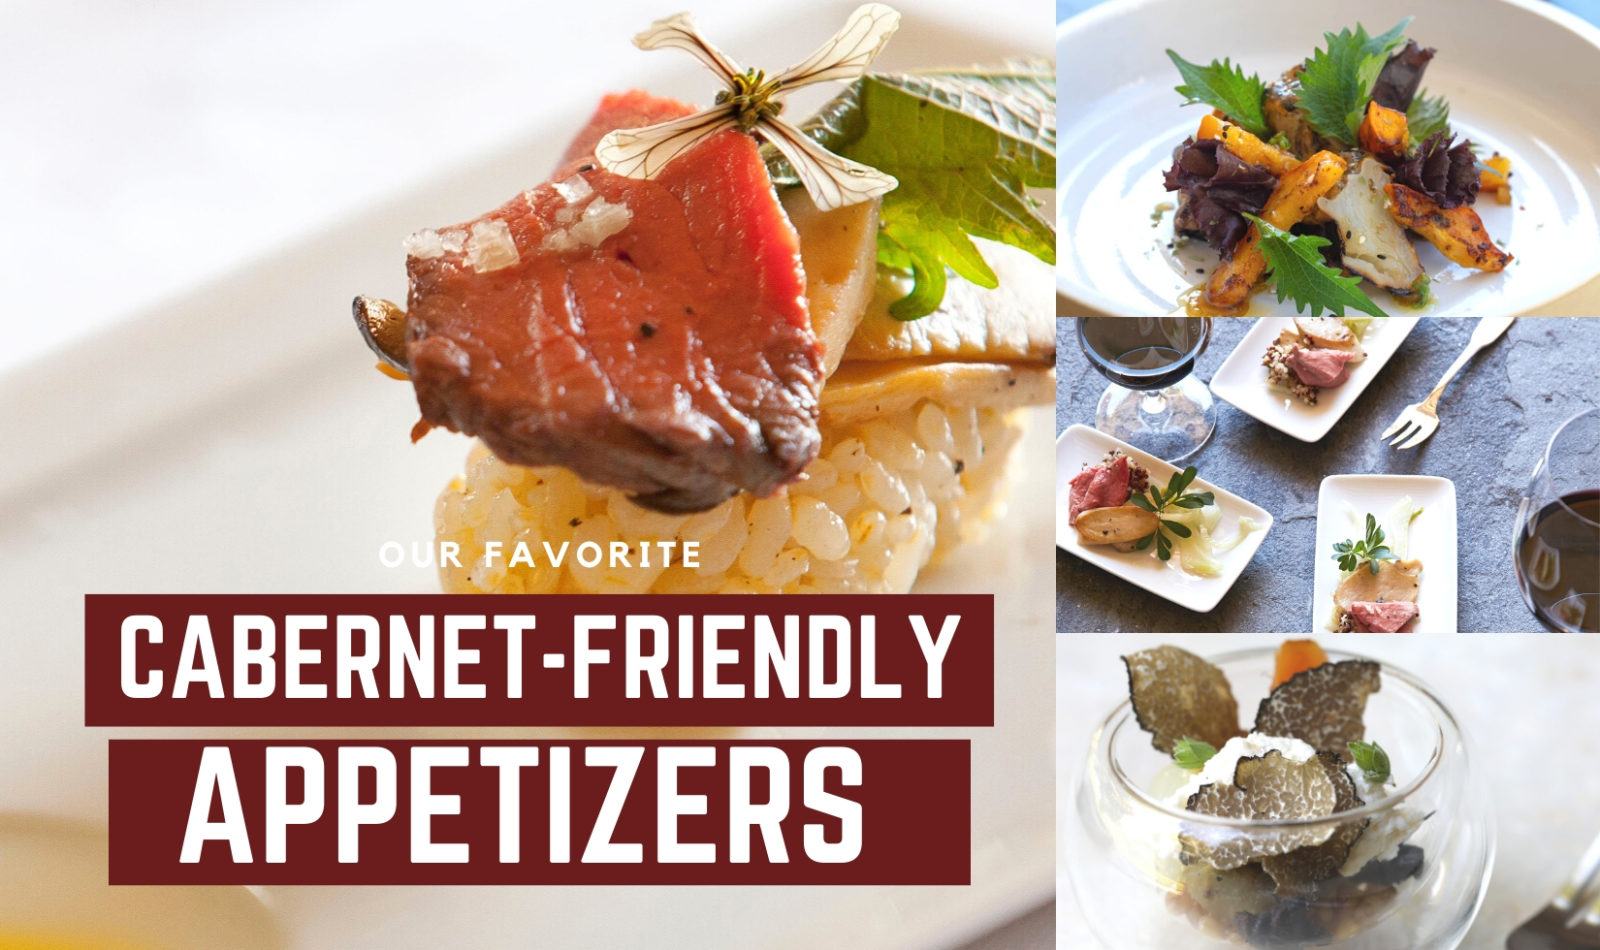 Photo collage of Jordan Winery appetizers with image text "our favorite Cabernet-friendly appetizers"